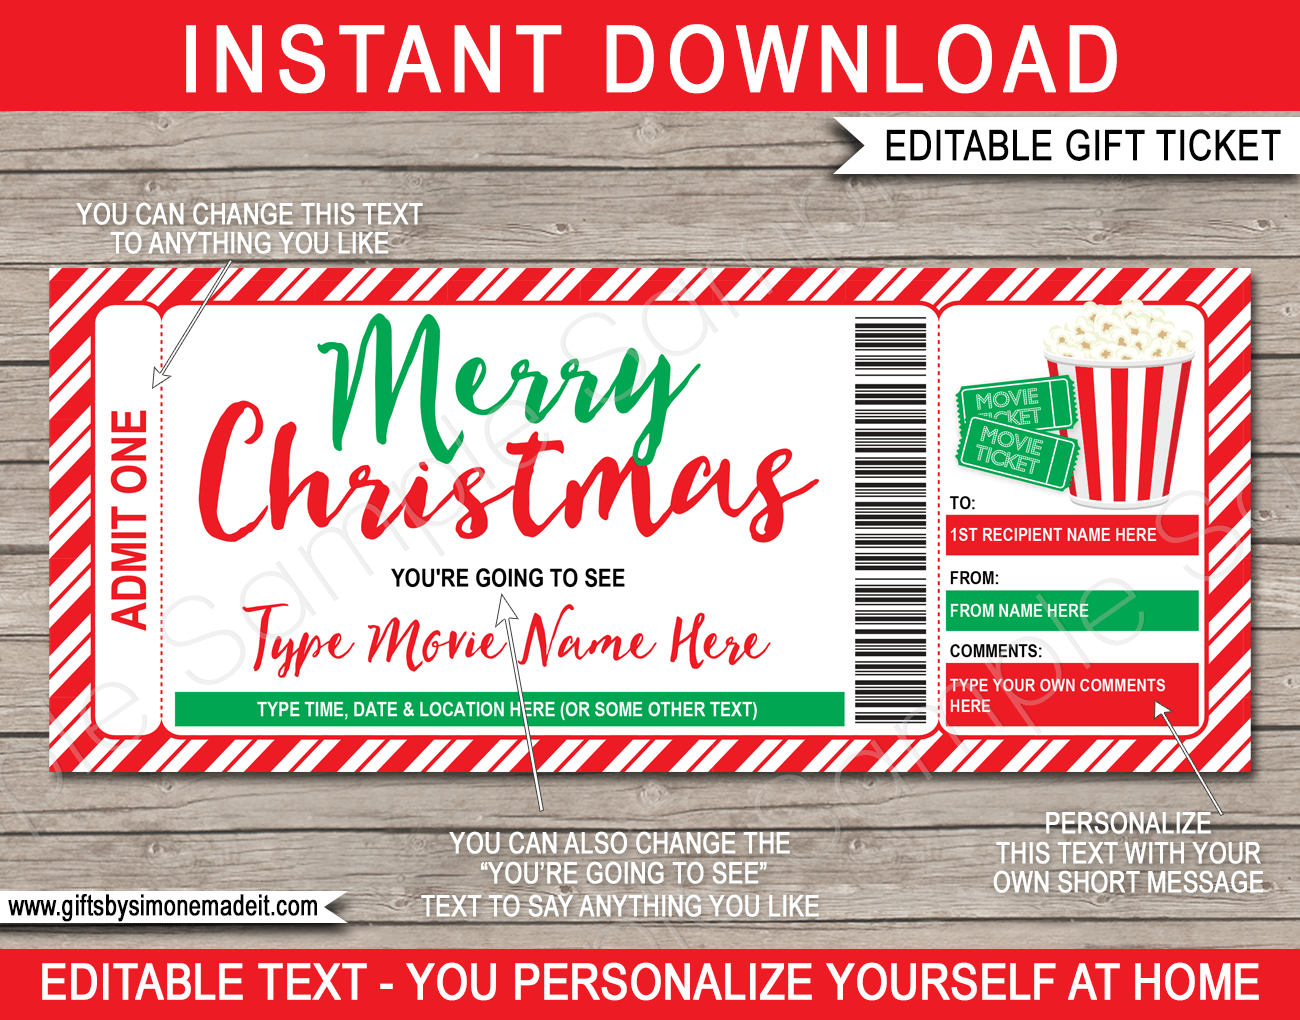 Christmas Movie Ticket Gift Template  Family Movie Night Gift Voucher In Movie Gift Certificate Template